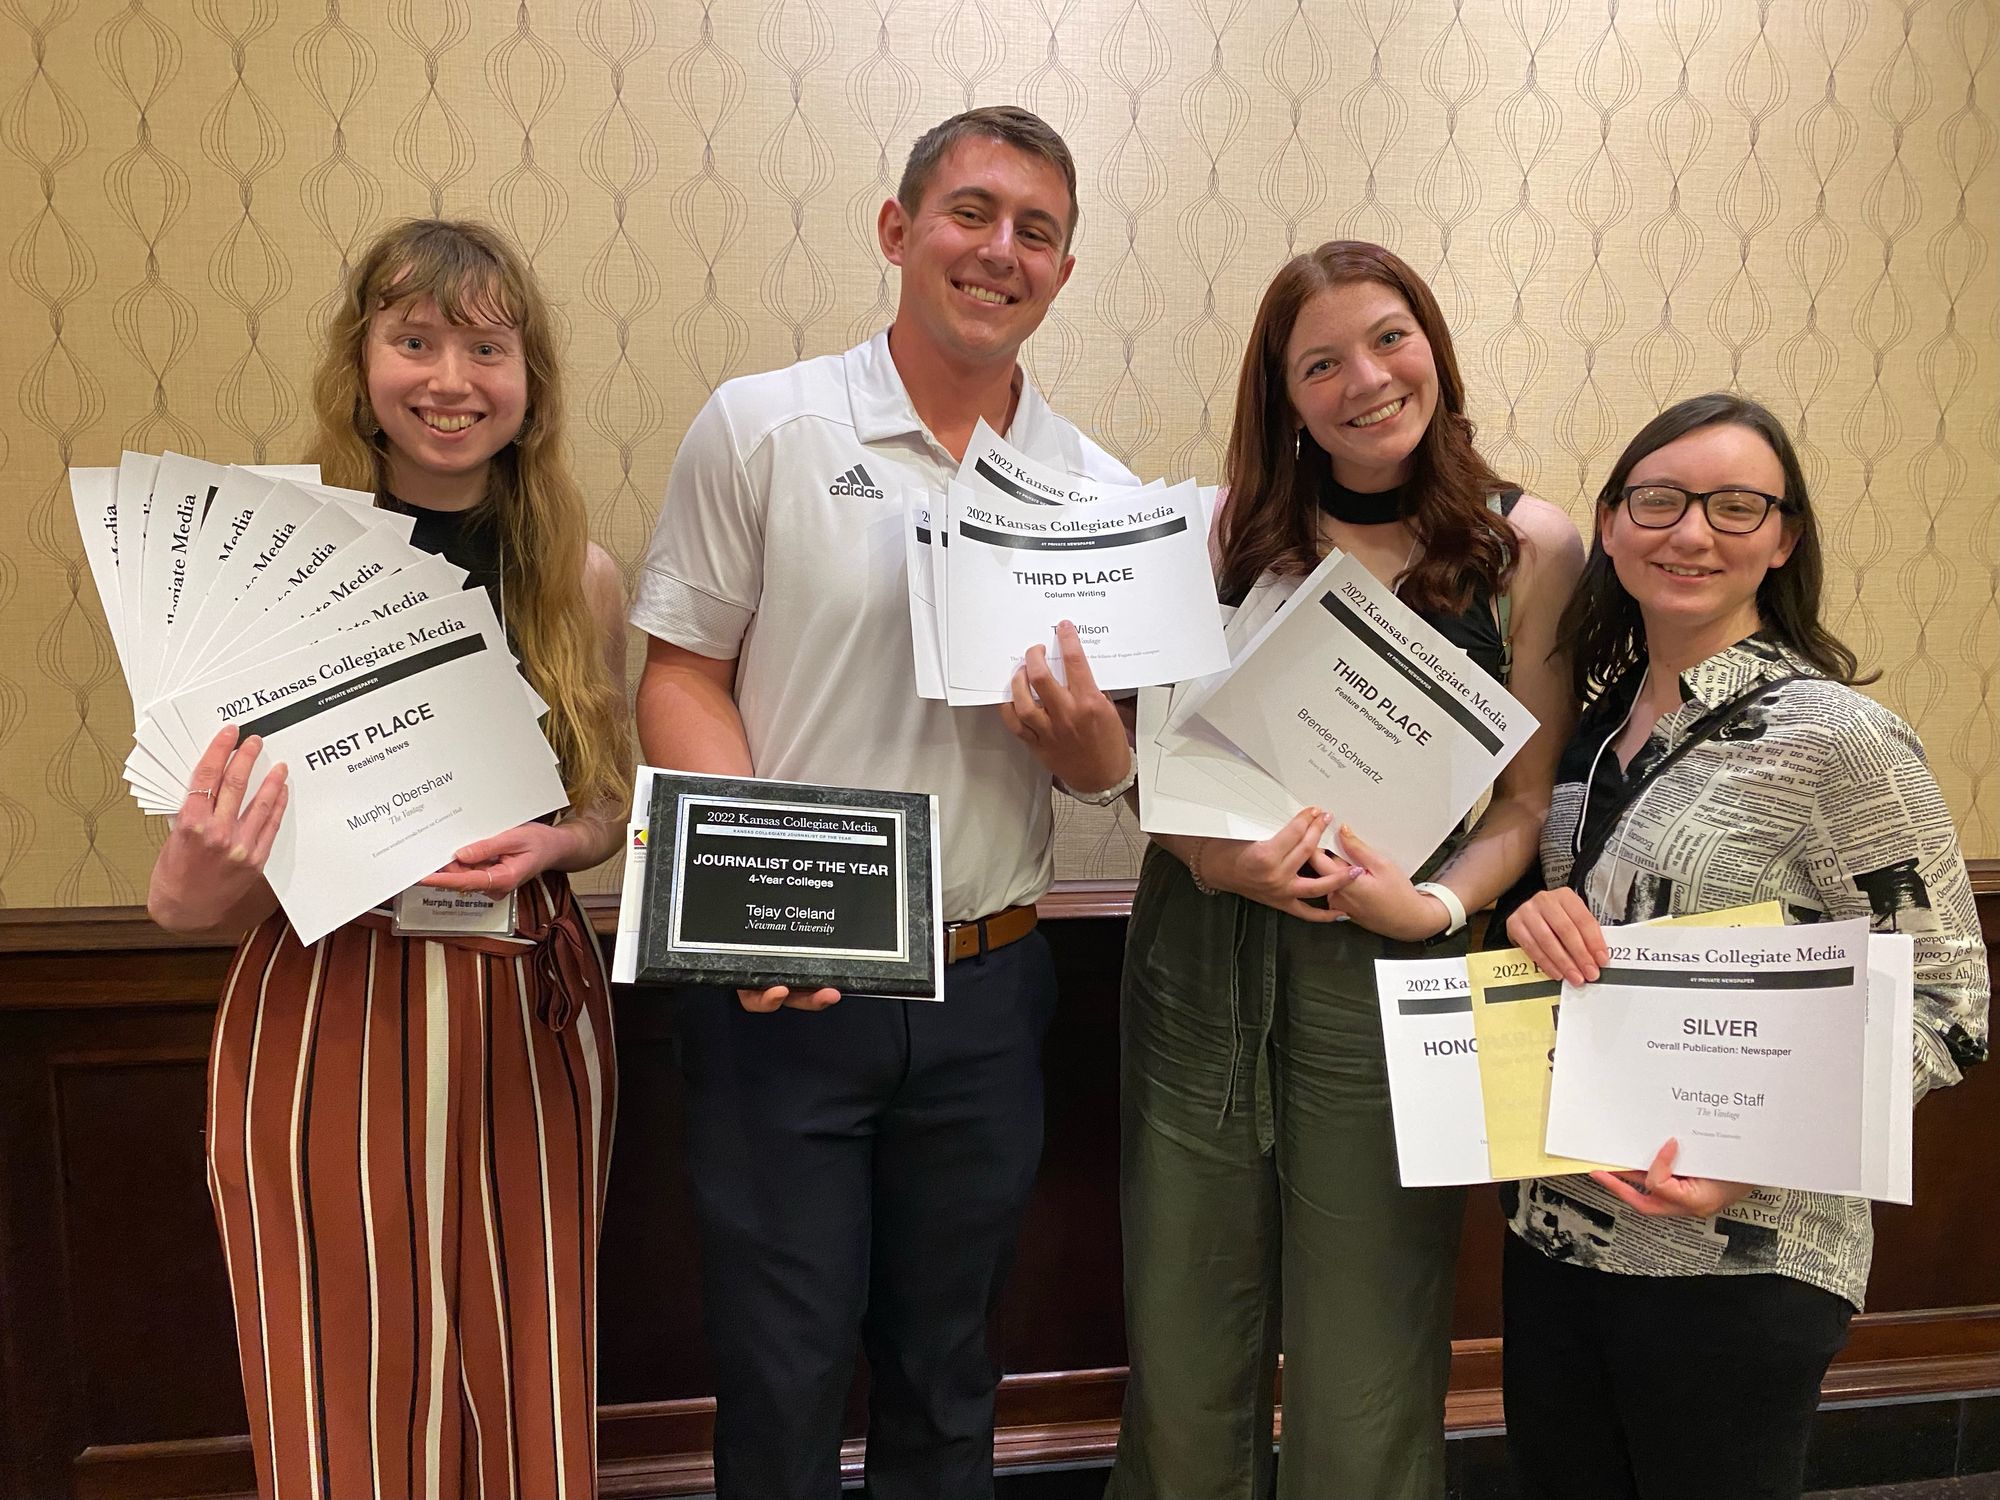 The Vantage Staff brings home awards from first KCM Conference in three years